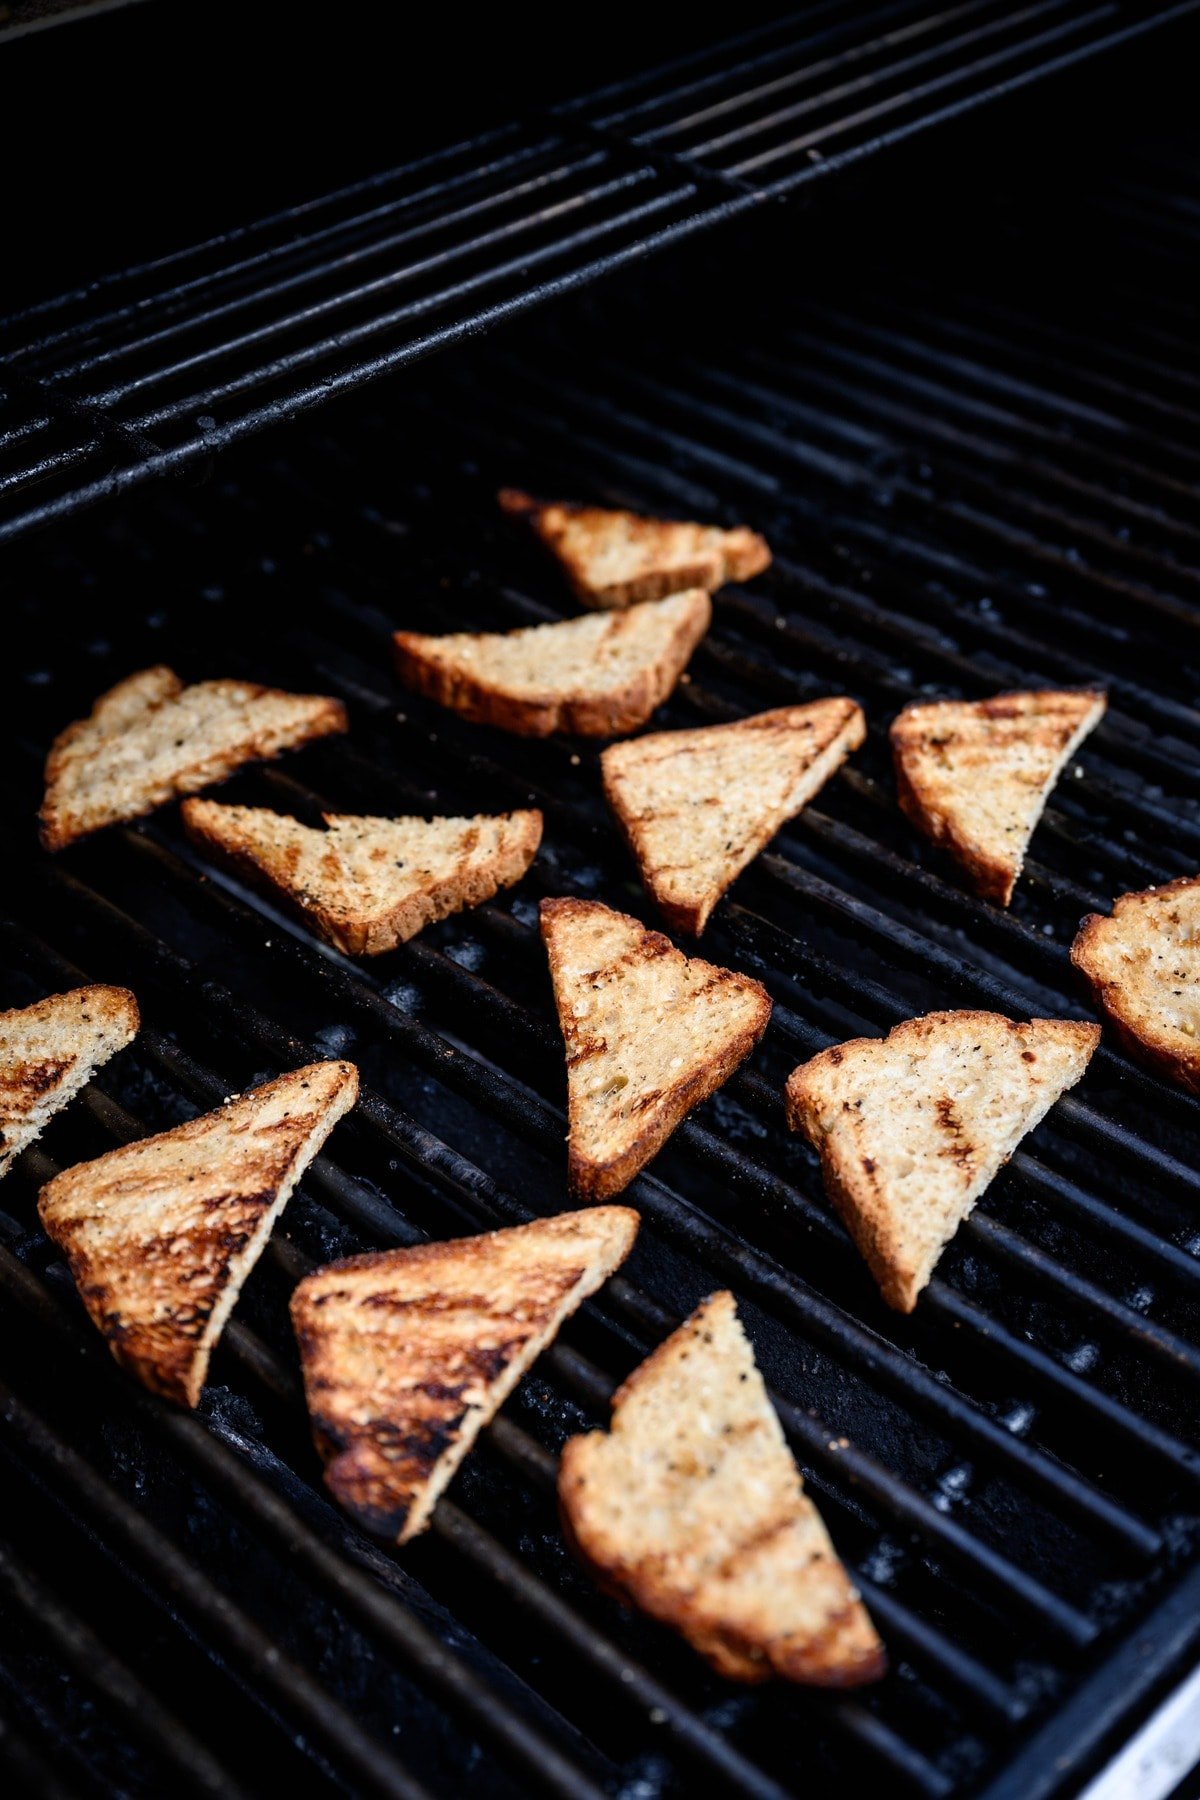 Slices of bread on a grill